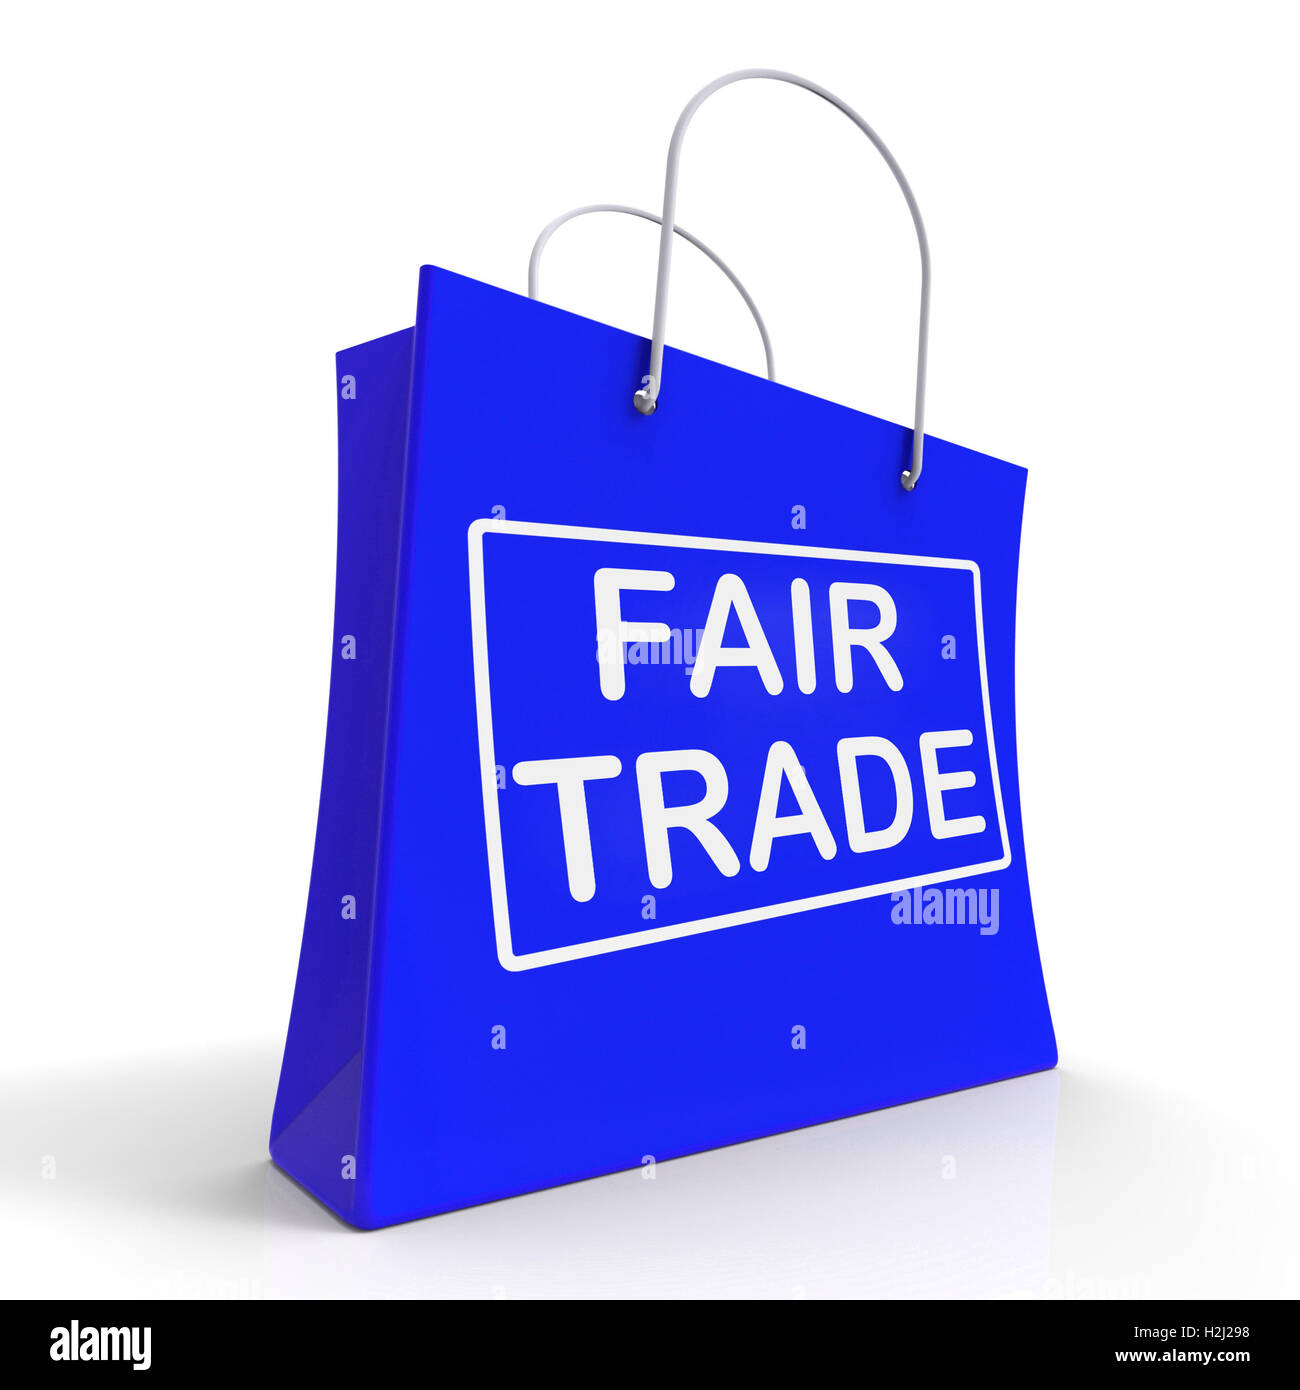 Fairtrade Shopping Bag Shows Fair Trade Product Or Products Stock Photo